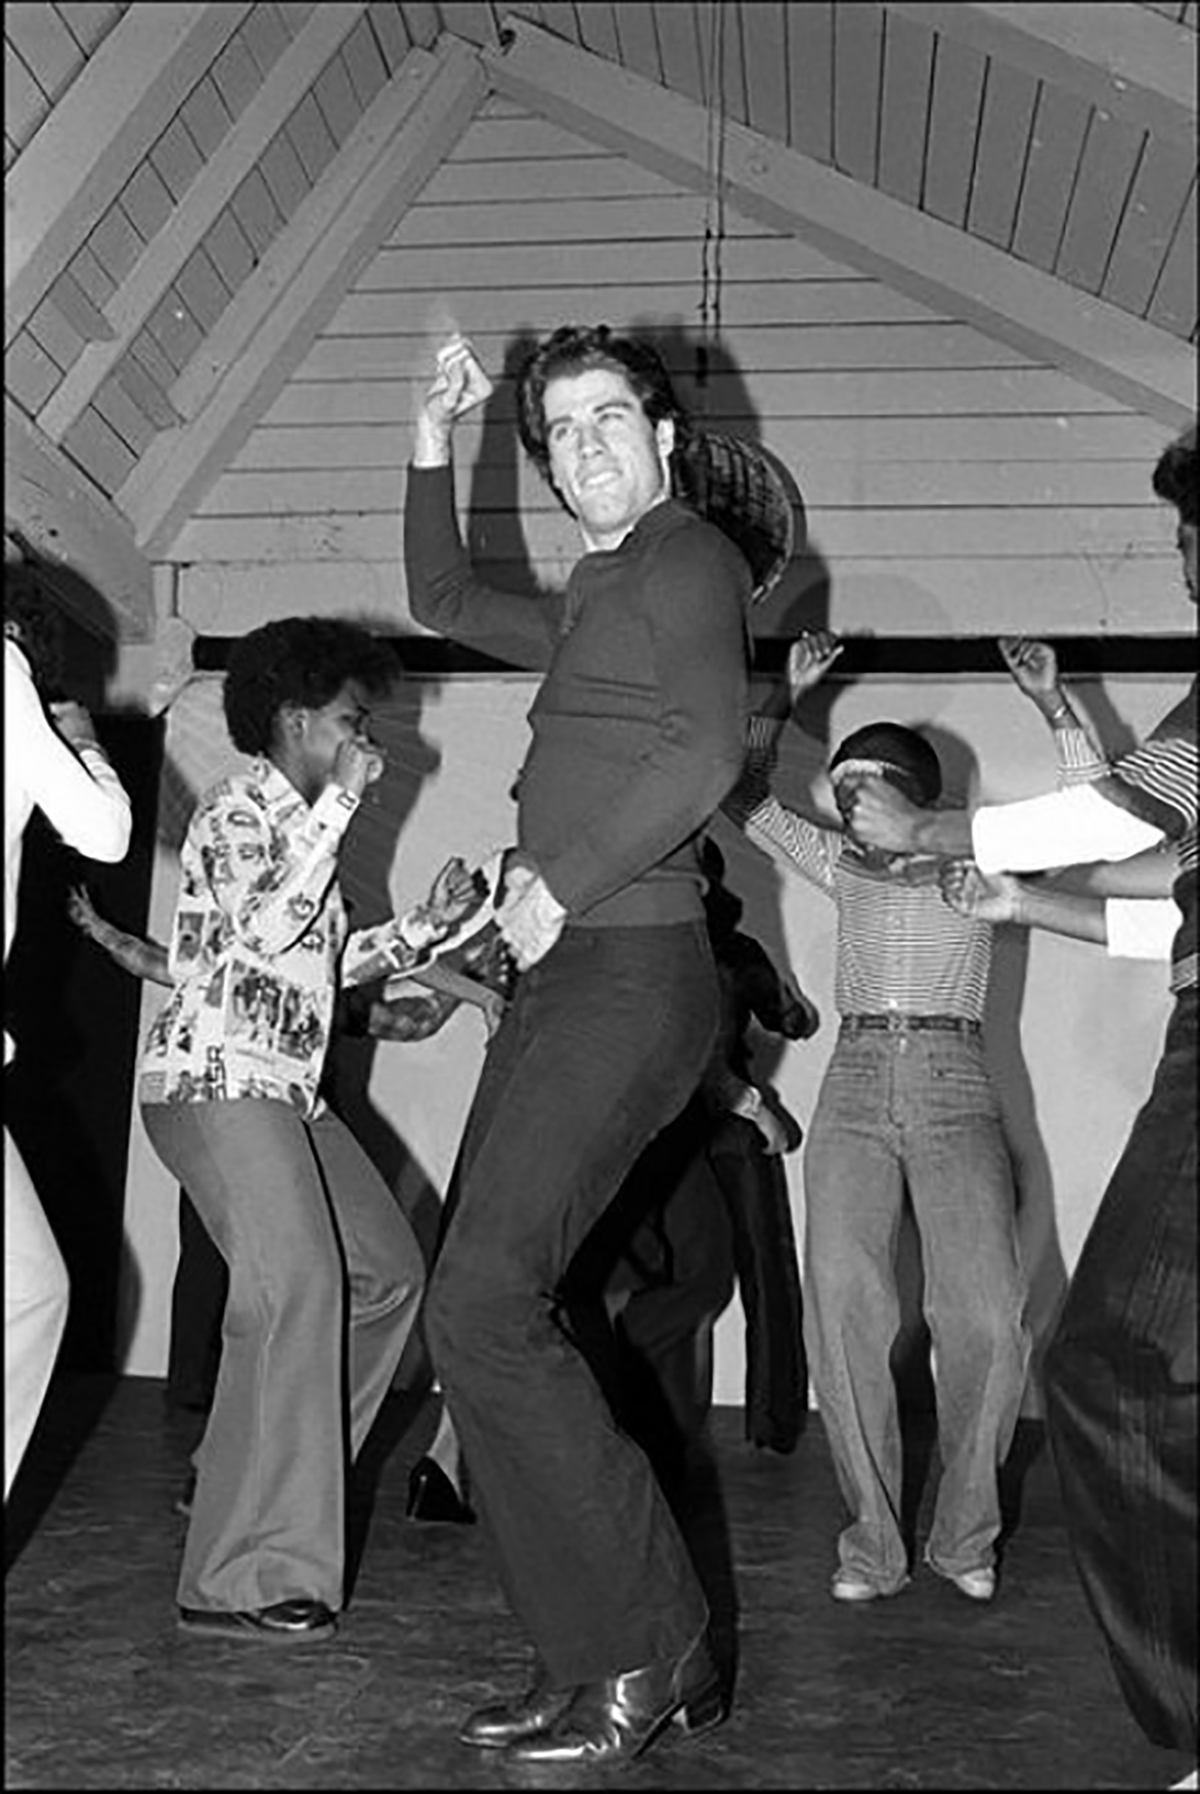 John Travolta at a disco party in the mid 1970s.